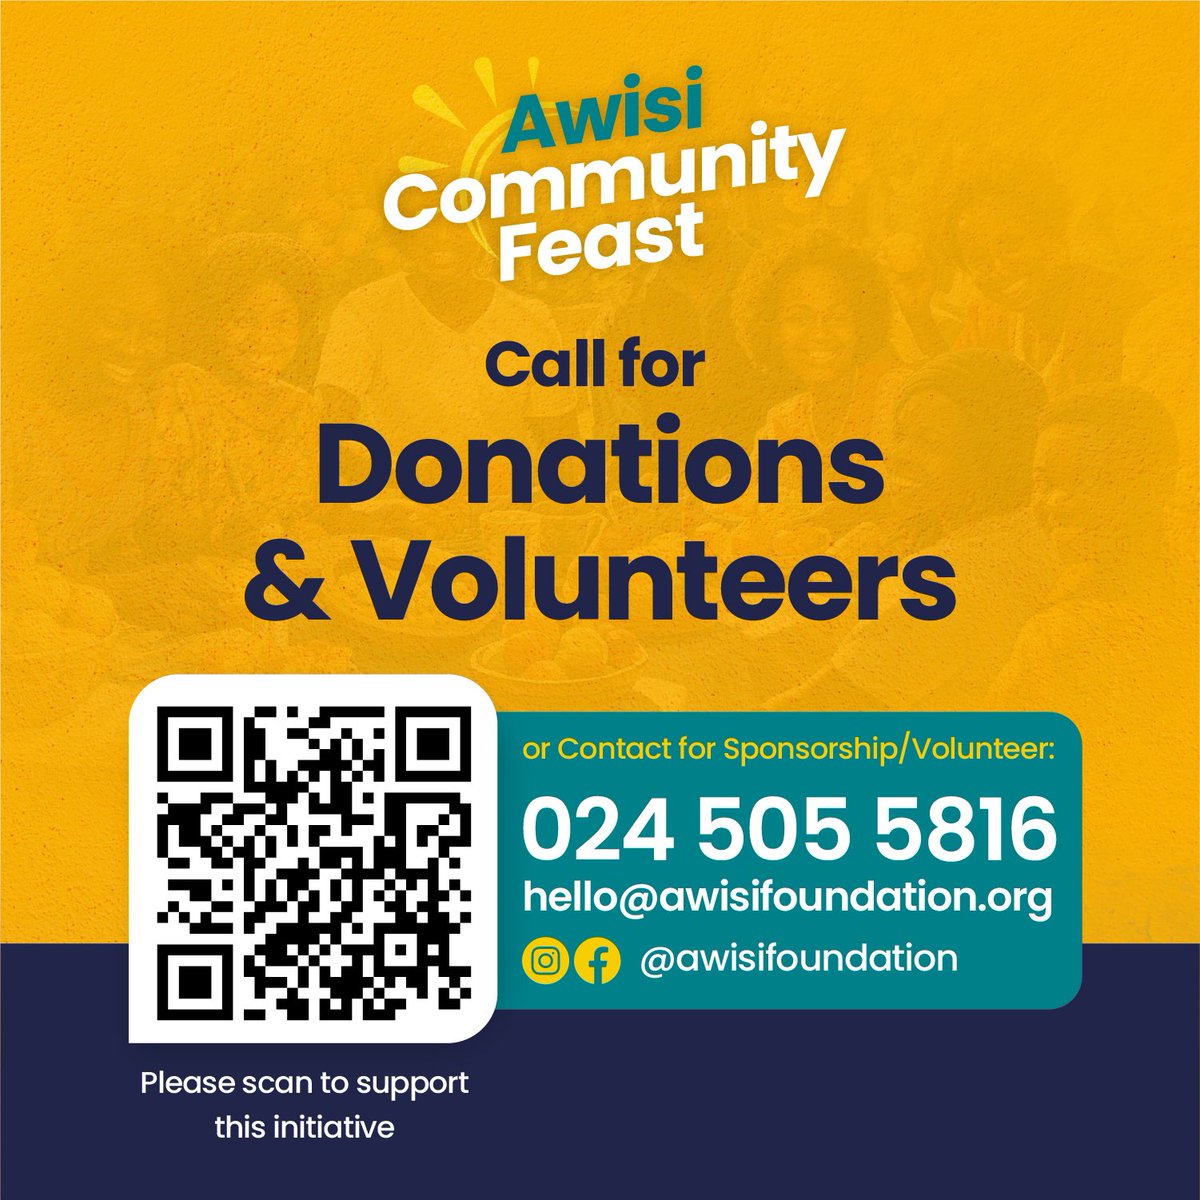 Feasting with purpose! Join us at the Awisi Foundation Community Feast as we come together to spread love, joy, and support to the residents of Nuaso and the children of Nectar Orphanage Home.
#communityfeast #awisifoundation #letscometogether #letslovehumanity #letsbekind #ngo